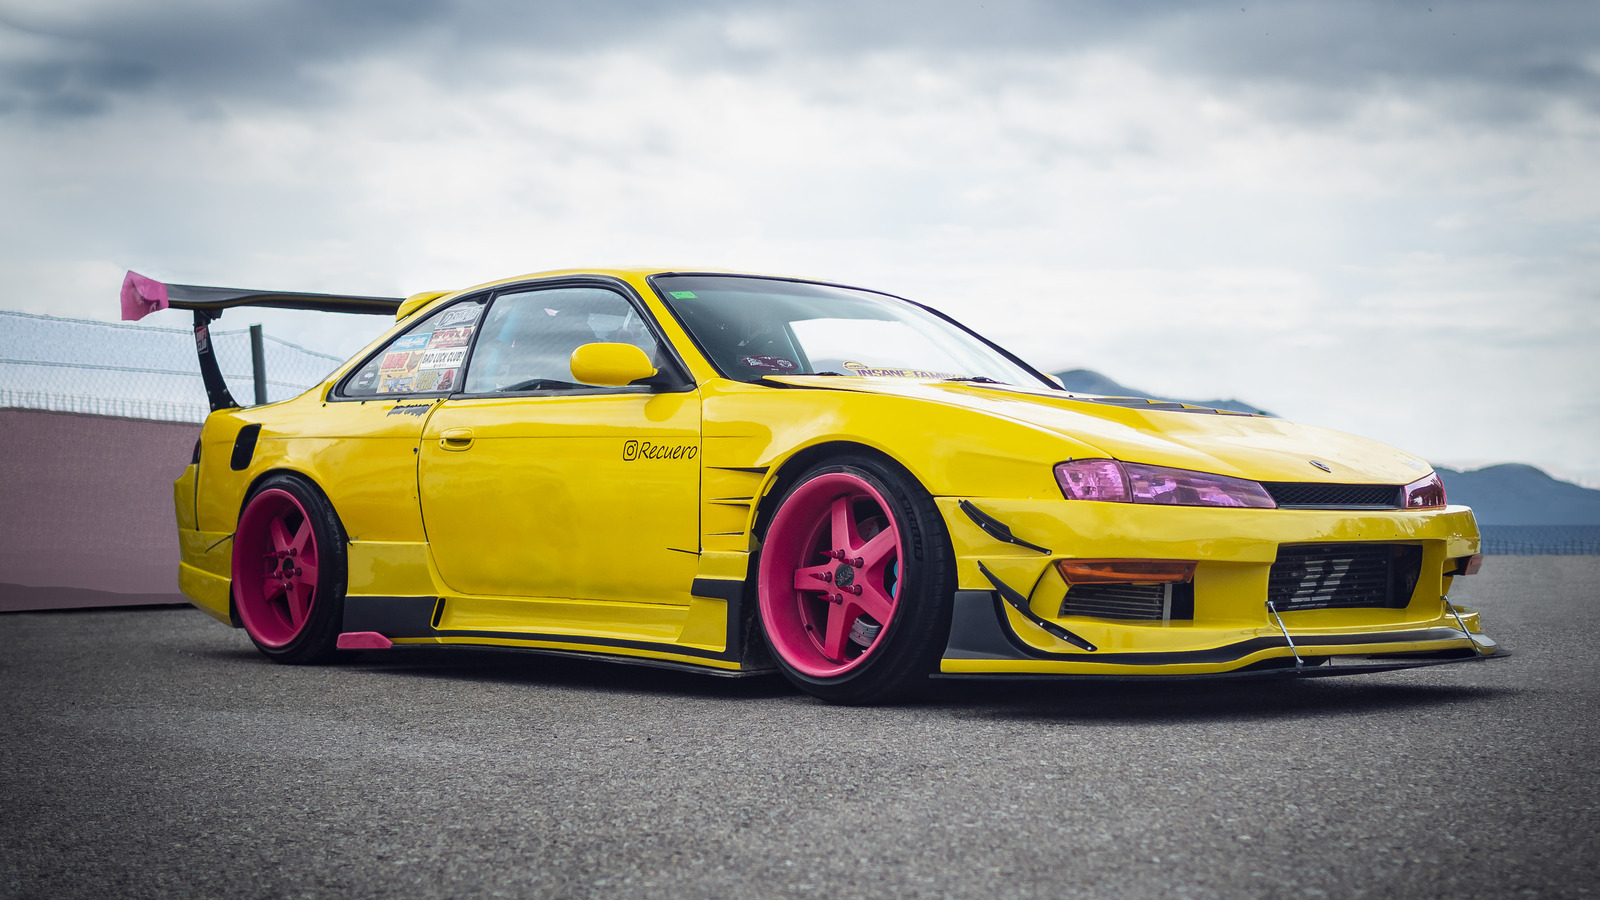 https://www.slashgear.com/img/gallery/10-things-that-made-the-nissan-240sx-such-an-awesome-drift-car/l-intro-1677774738.jpg